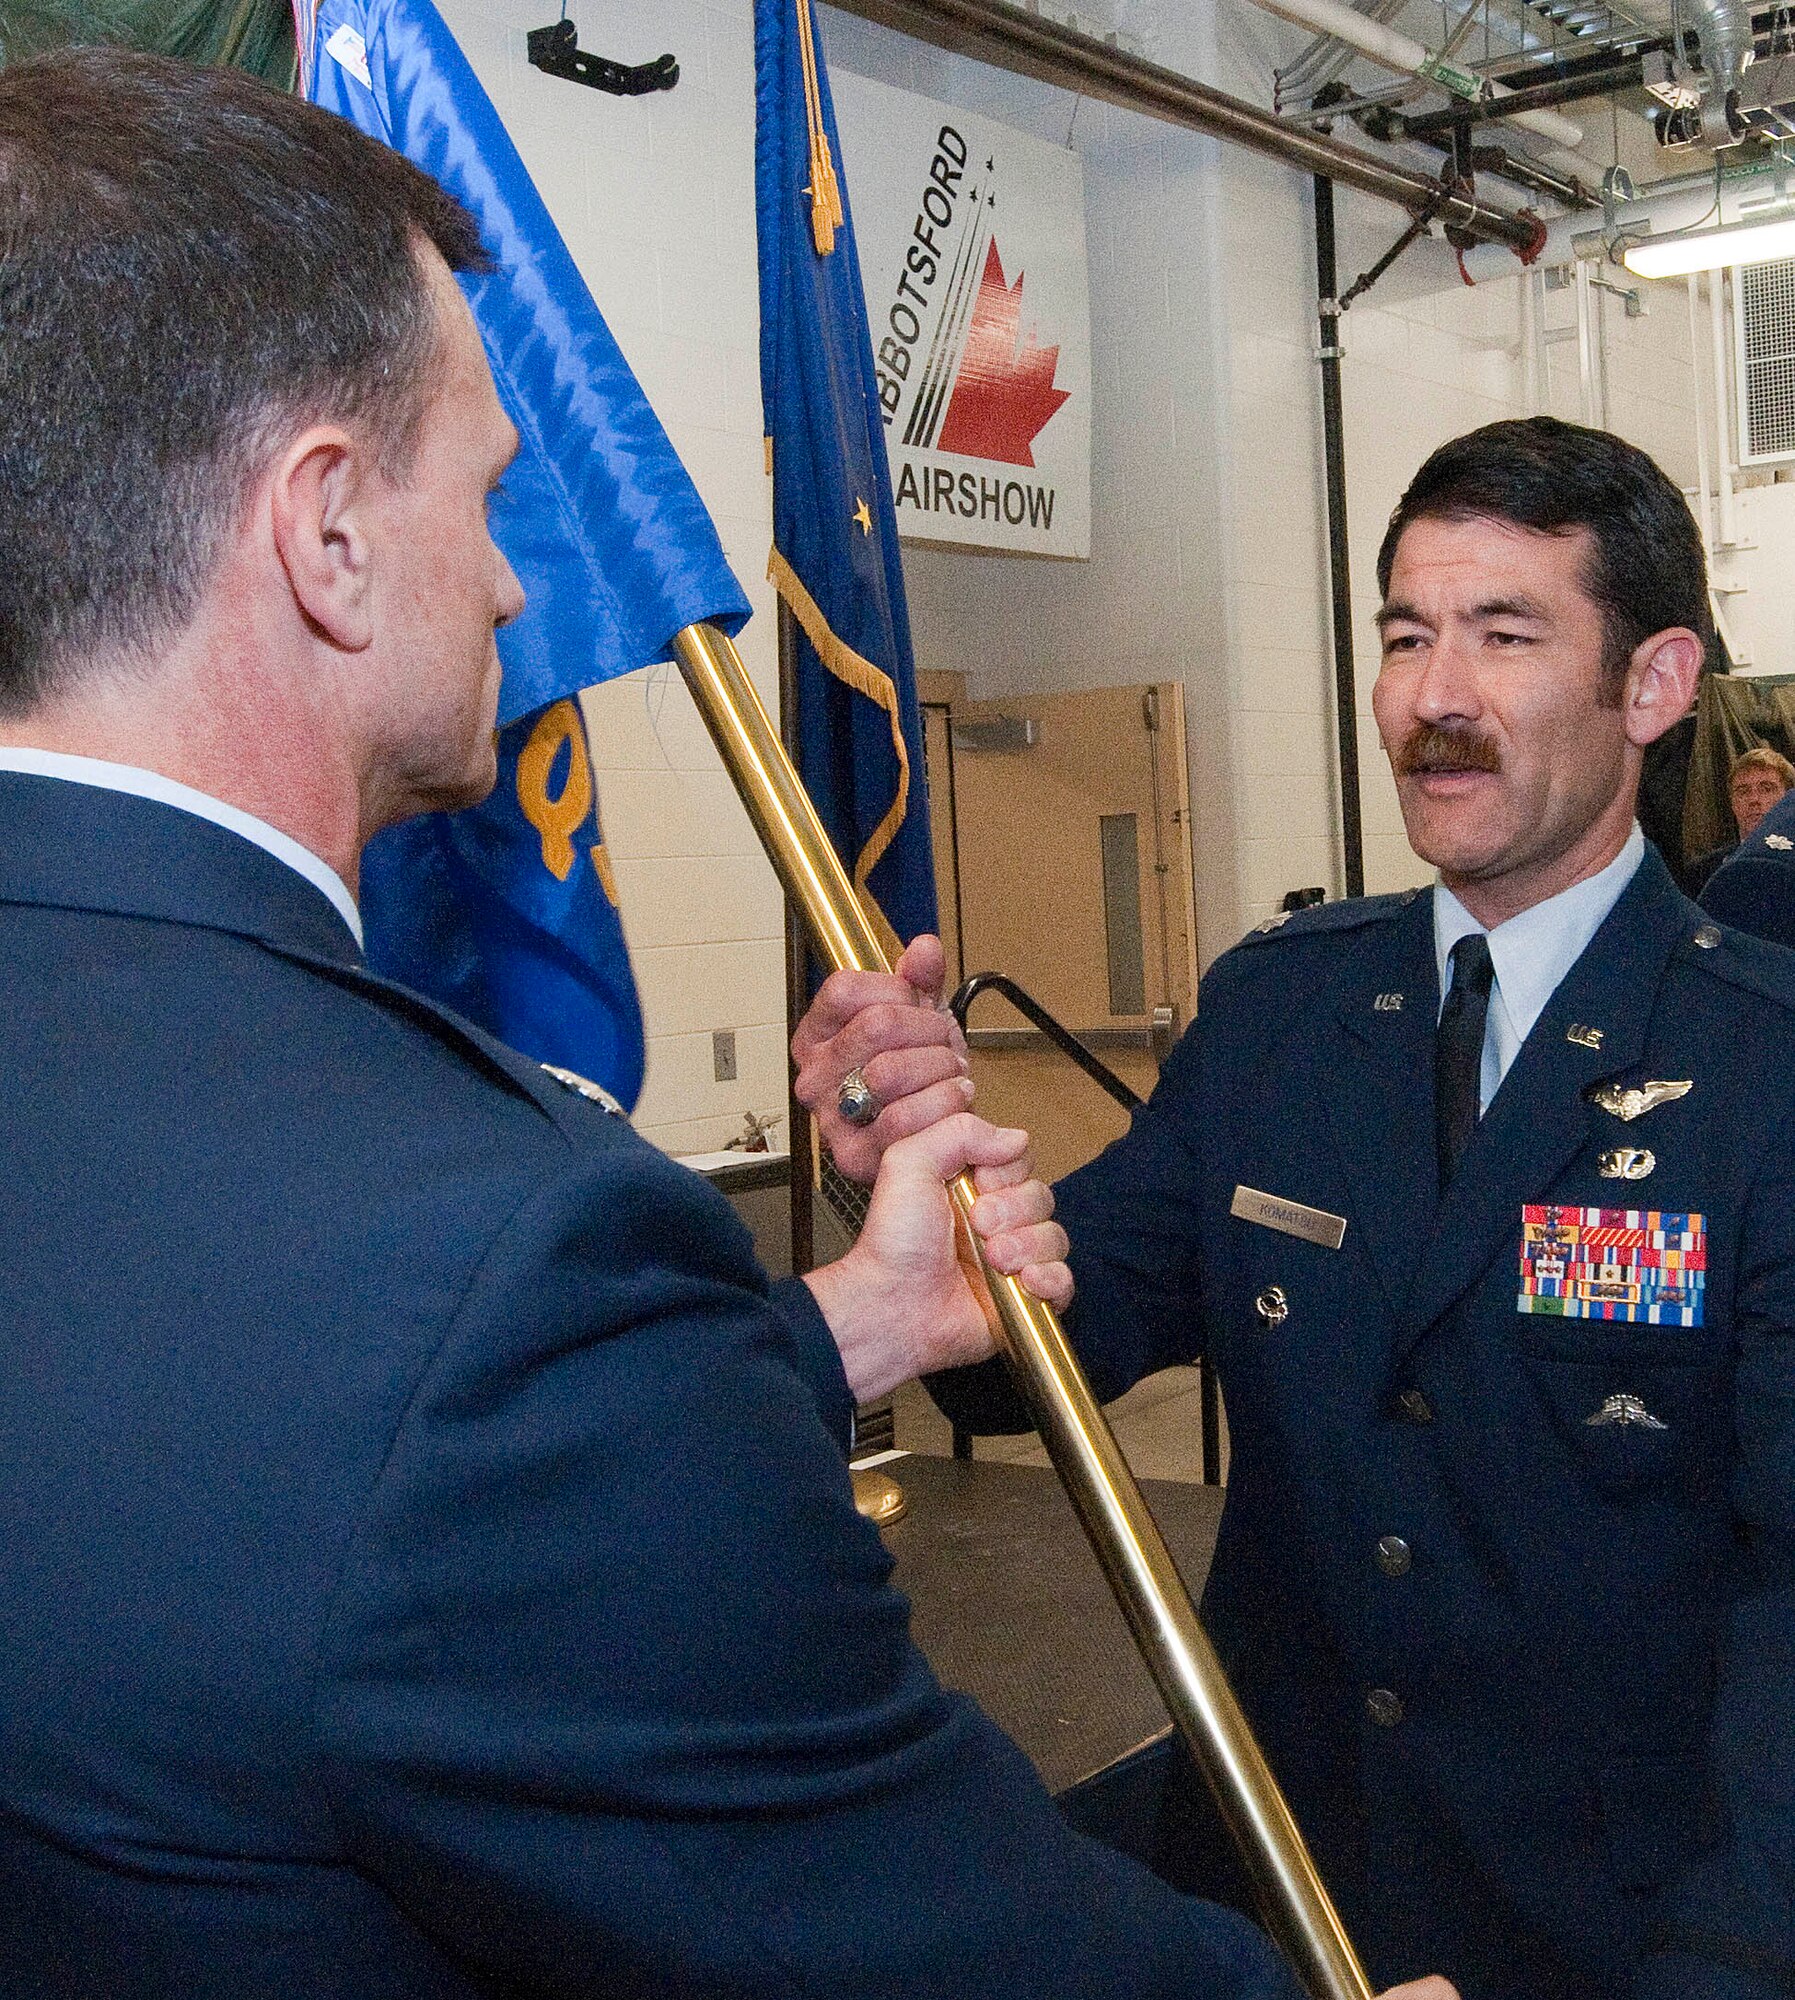 Lt. Col. Matthew Komatsu, a combat rescue officer with the Alaska Air National Guard's 212th Rescue Squadron, recieves his unit's command flag from Lt. Col. Tom Bolin, commander of the 176th Operations Group, in a ceremony on Joint Base Elmendorf-Richardson Aug. 27, 2015.  A veteran of multiple deployments, Komatsu had been serving as the squadron's director of operations. National Guard photo by Capt. John Callahan.